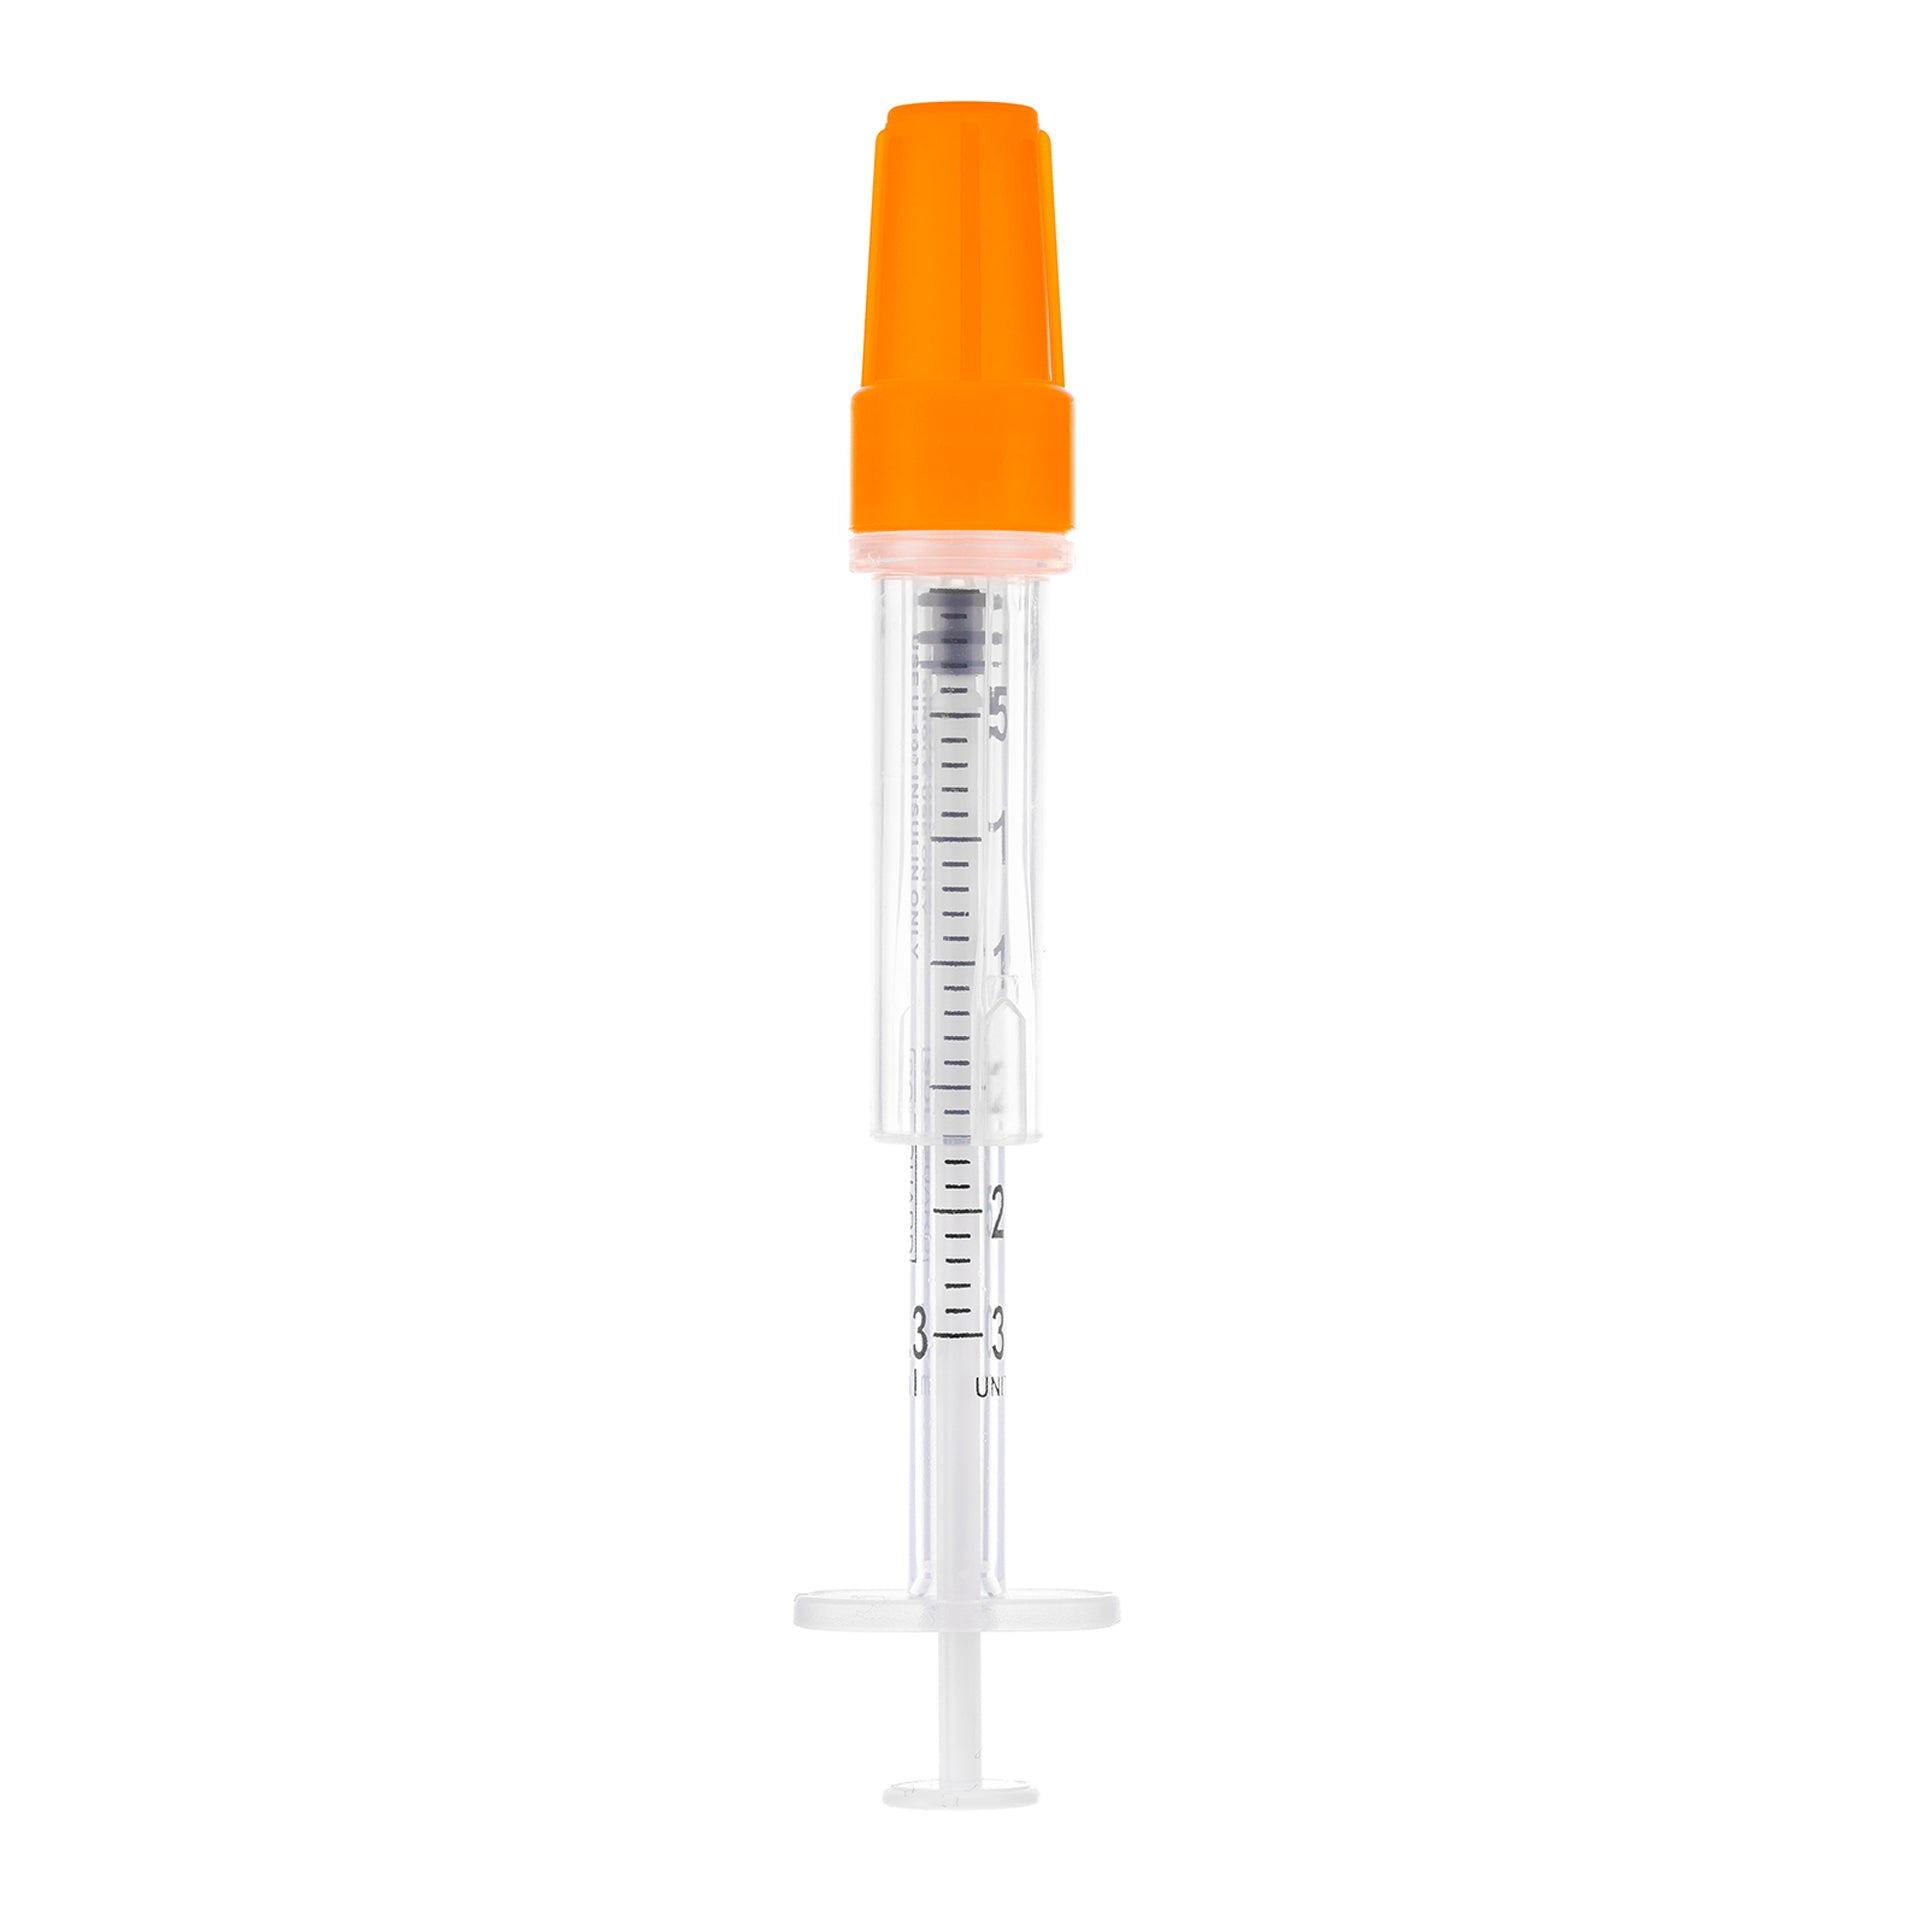 BX/100 - SOL-GUARD 0.5ml Insulin Safety Syringe w/Fixed Needle 29G*1/2'' (U-100 Insulin Only)